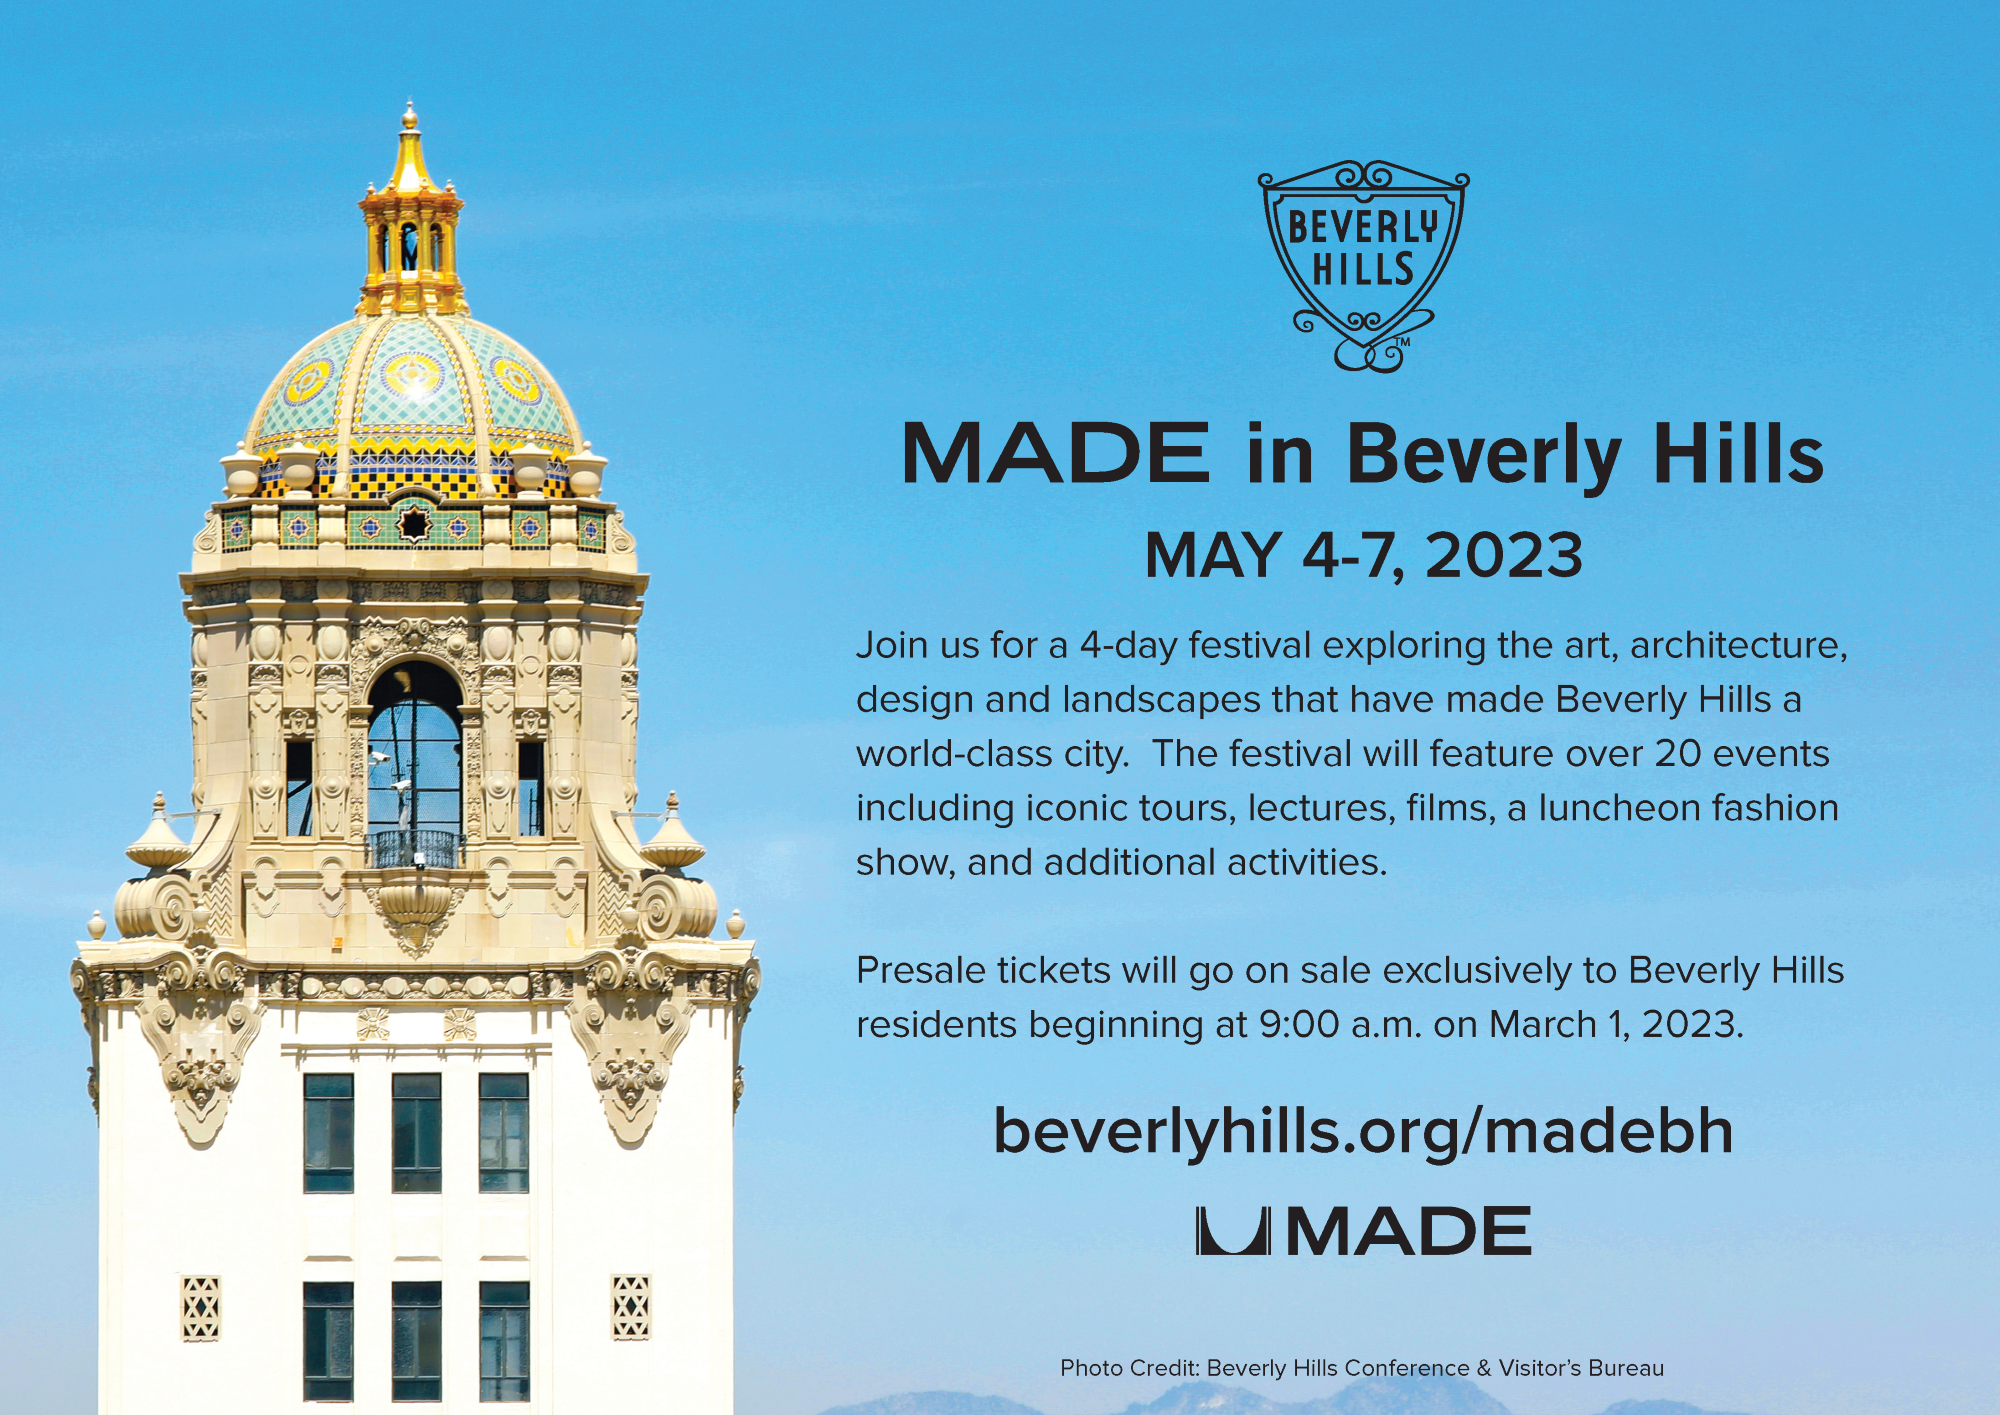 MADE in Beverly Hills Festival